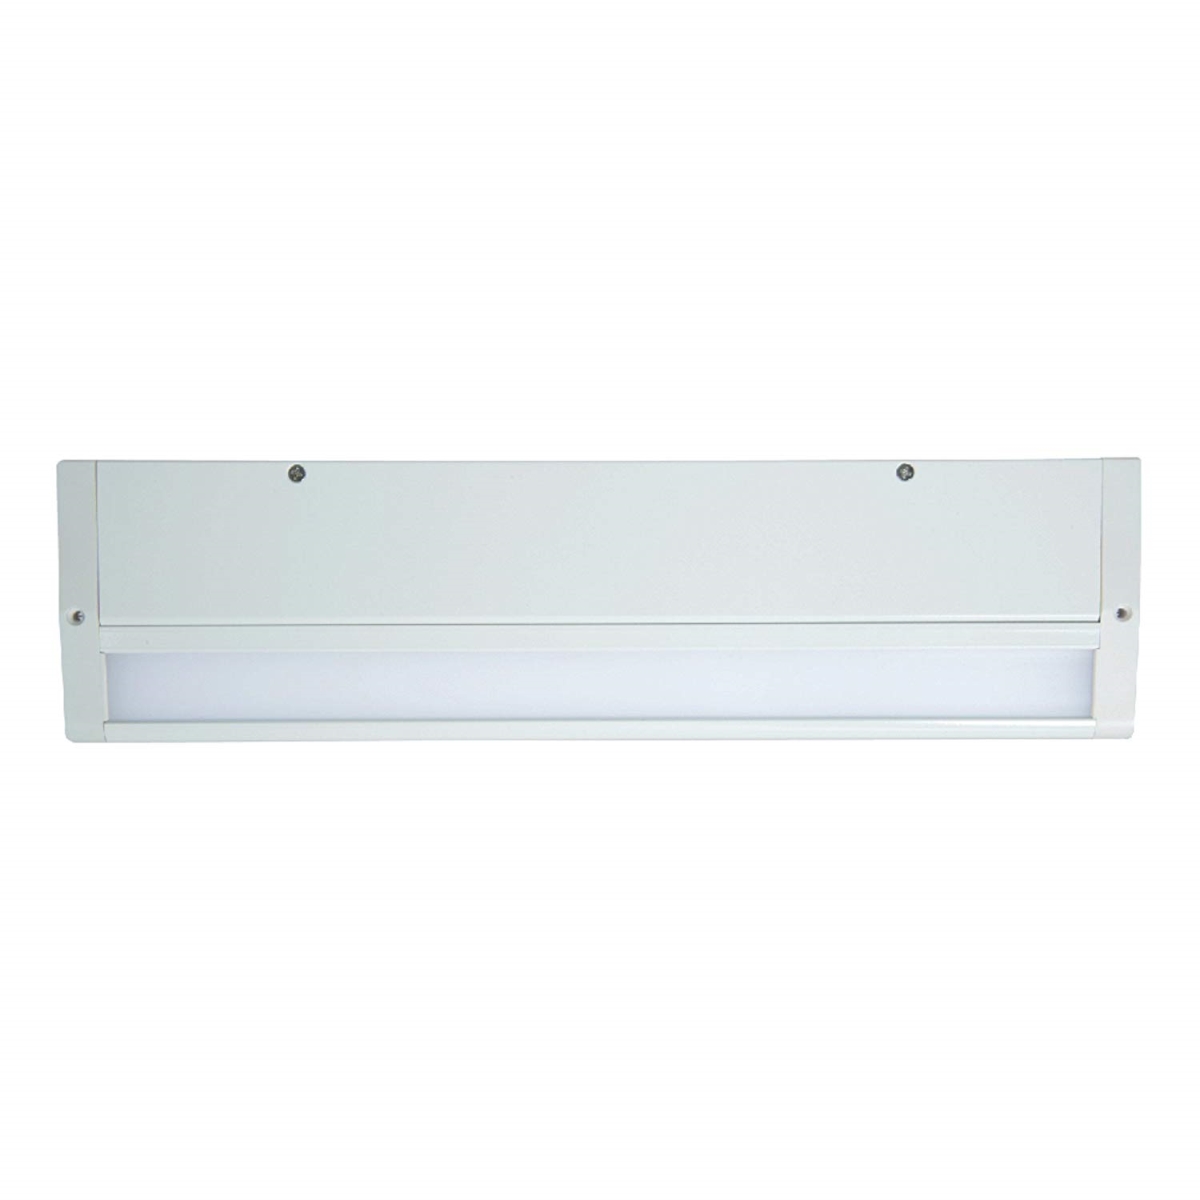 Hu1024d930p Halo Hu10 Led Undercabinet, White - 24 In.